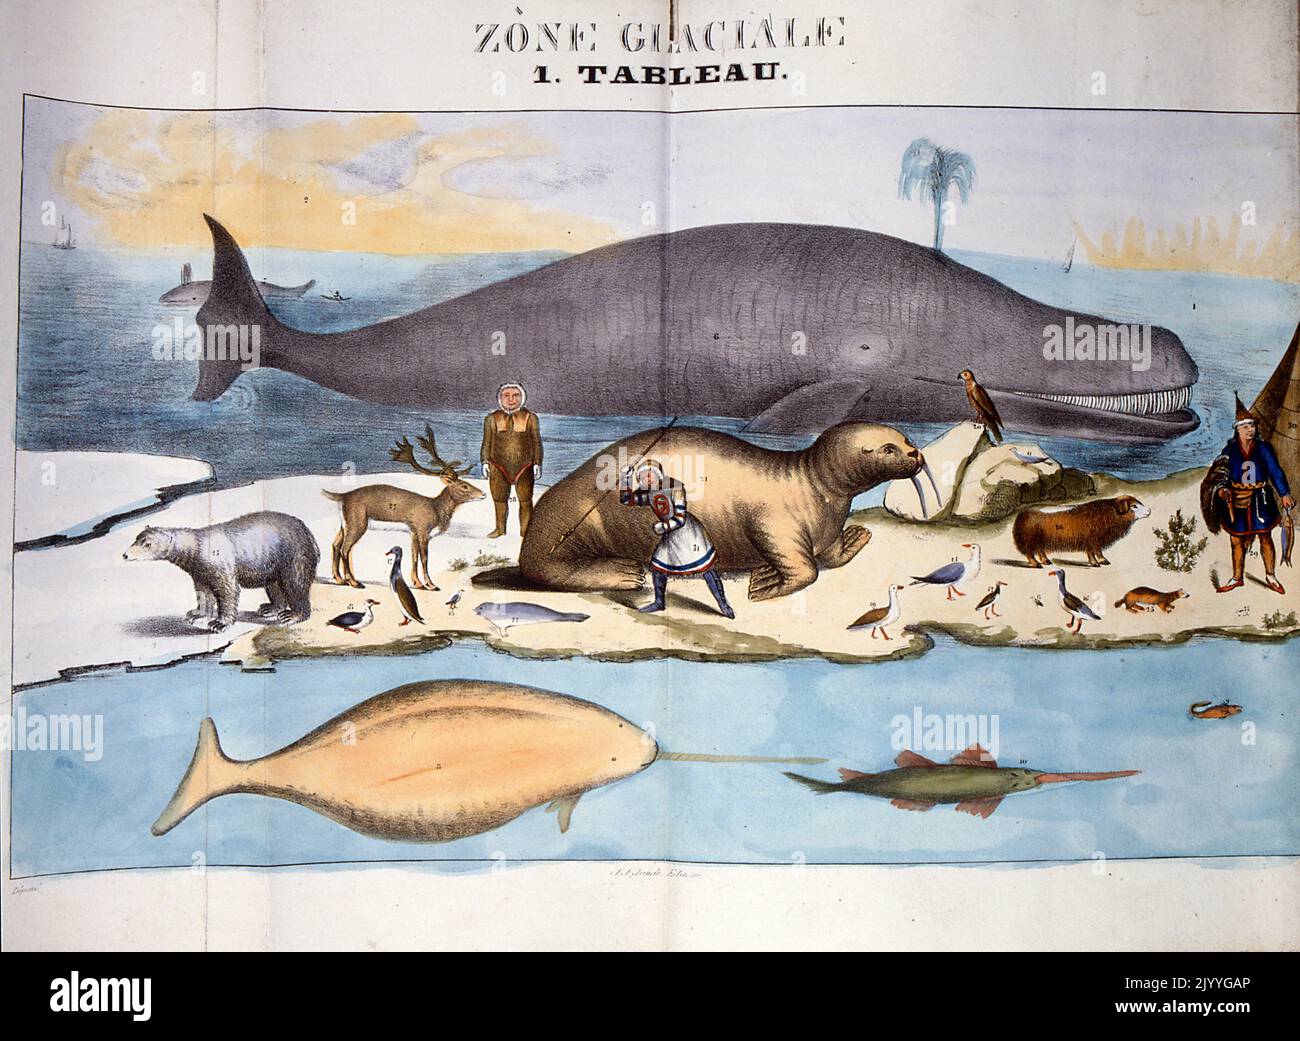 Coloured Illustration entitled 'Frozen Zone' depicting animals and people in the Arctic. Stock Photo